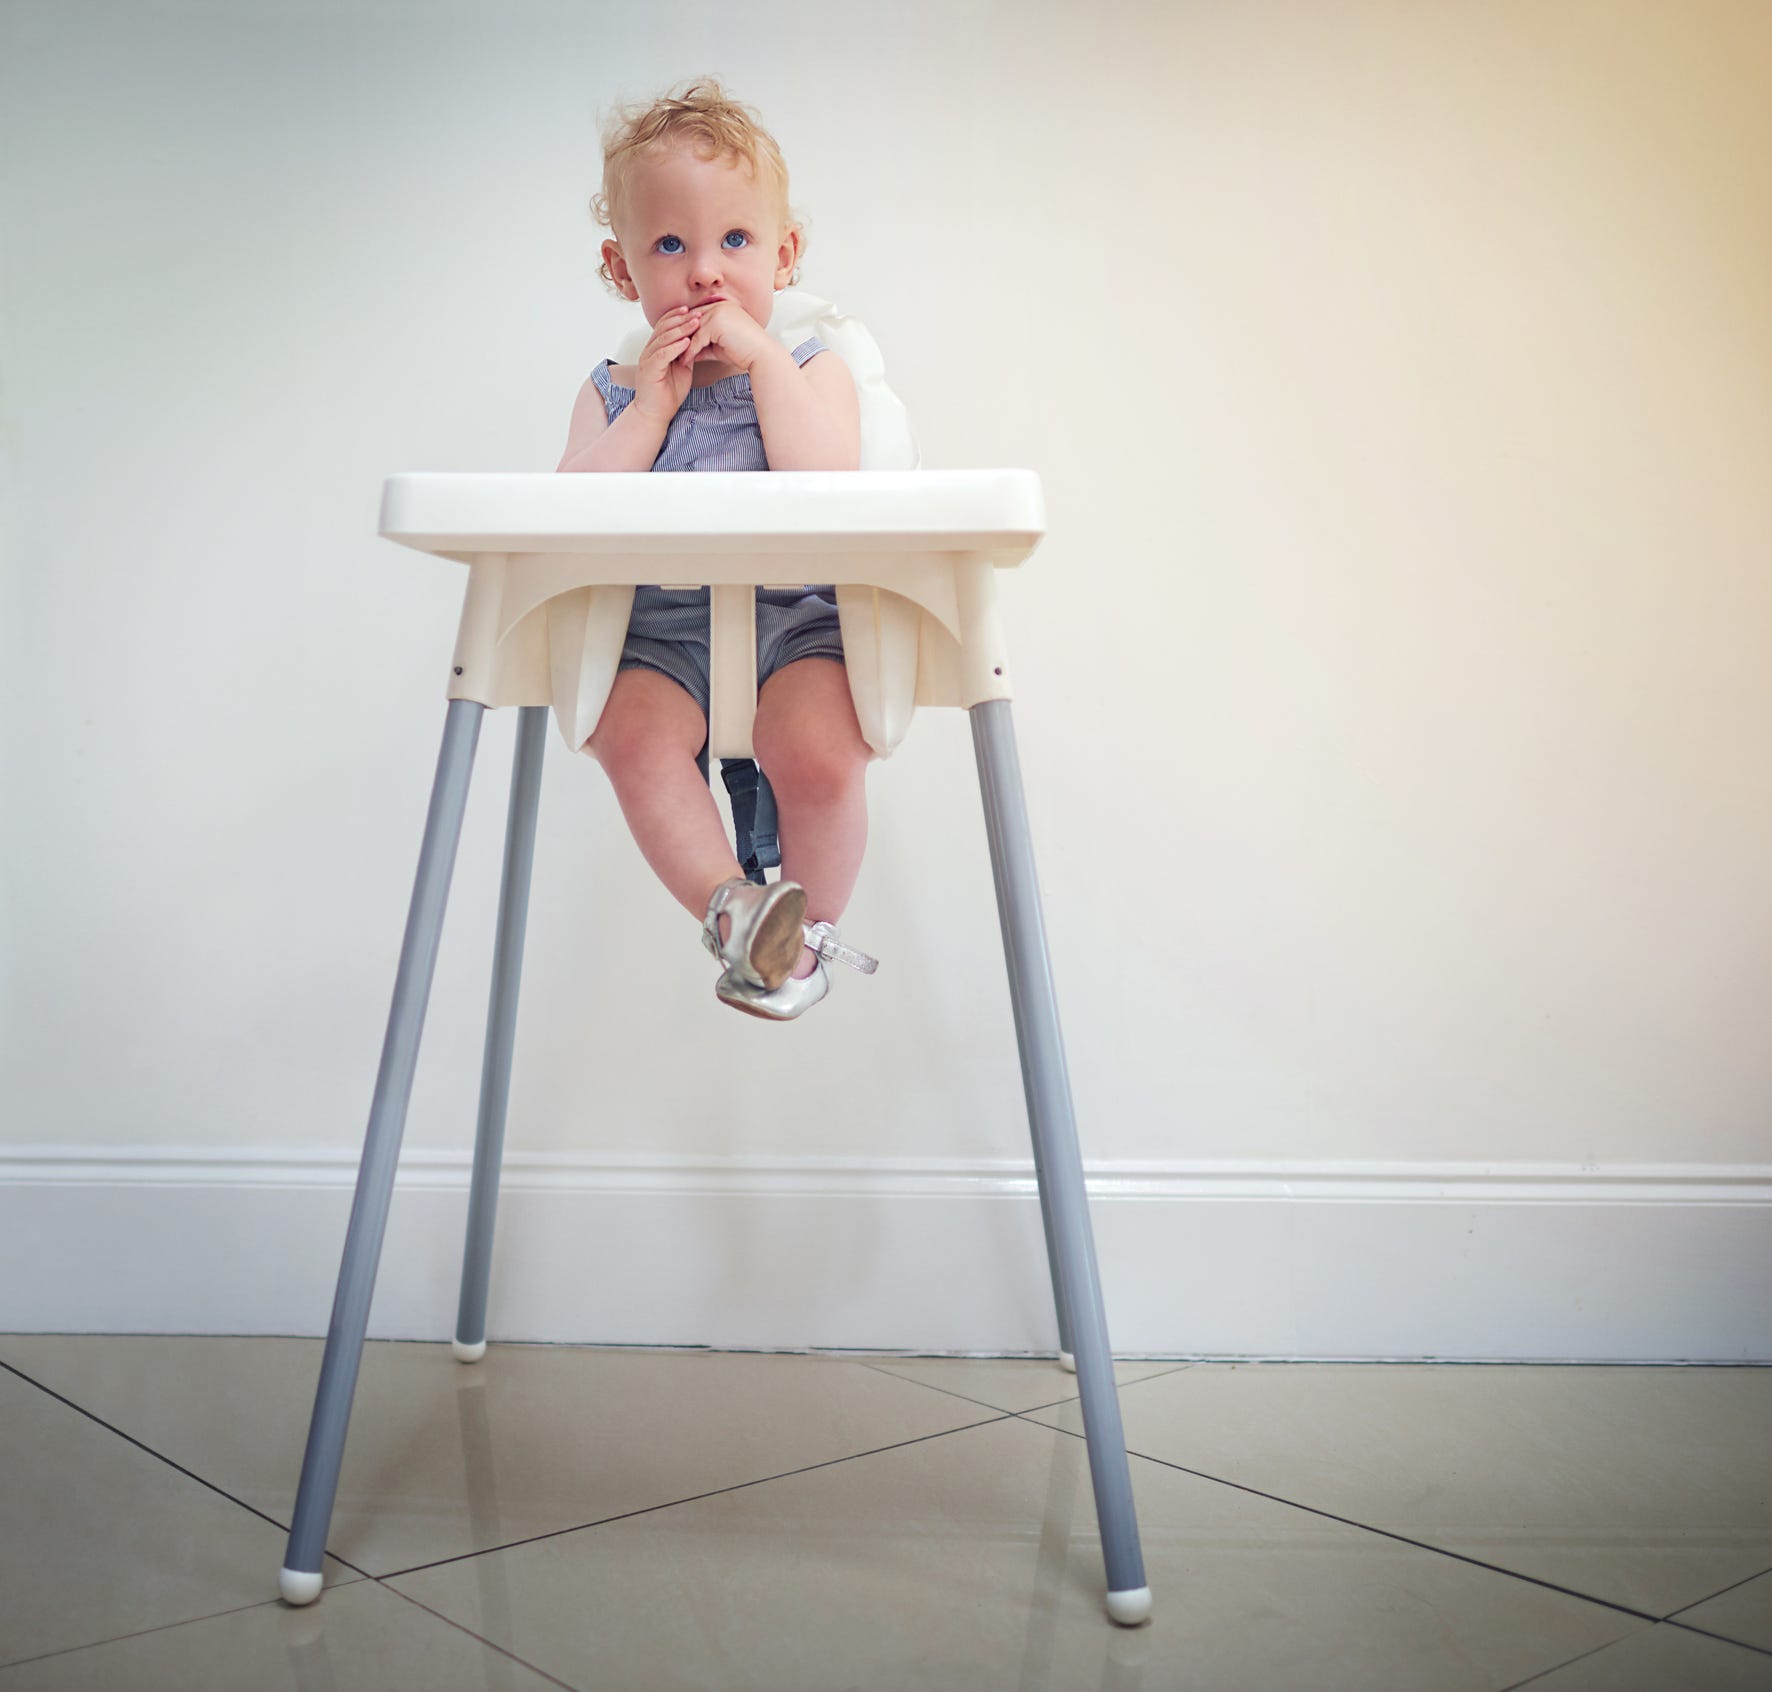 New high chair safety standards are 